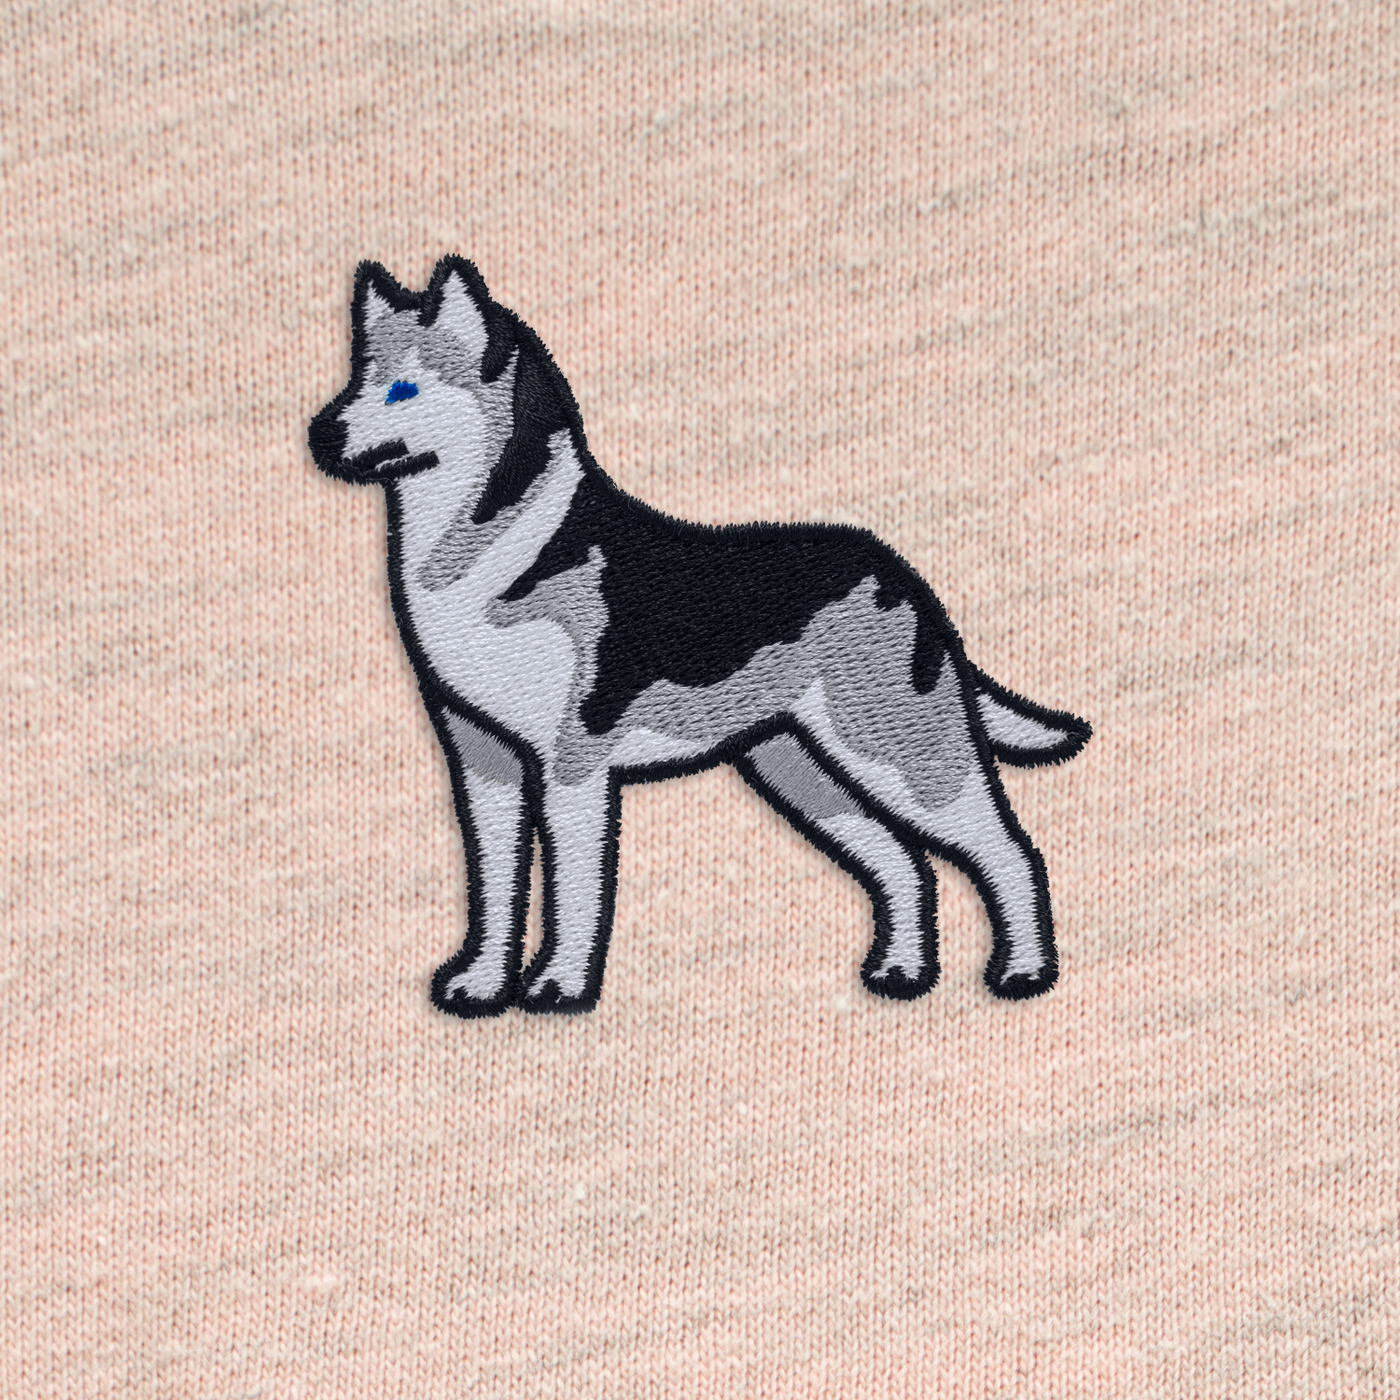 Bobby's Planet Women's Embroidered Siberian Husky T-Shirt from Paws Dog Cat Animals Collection in Heather Prism Peach Color#color_heather-prism-peach